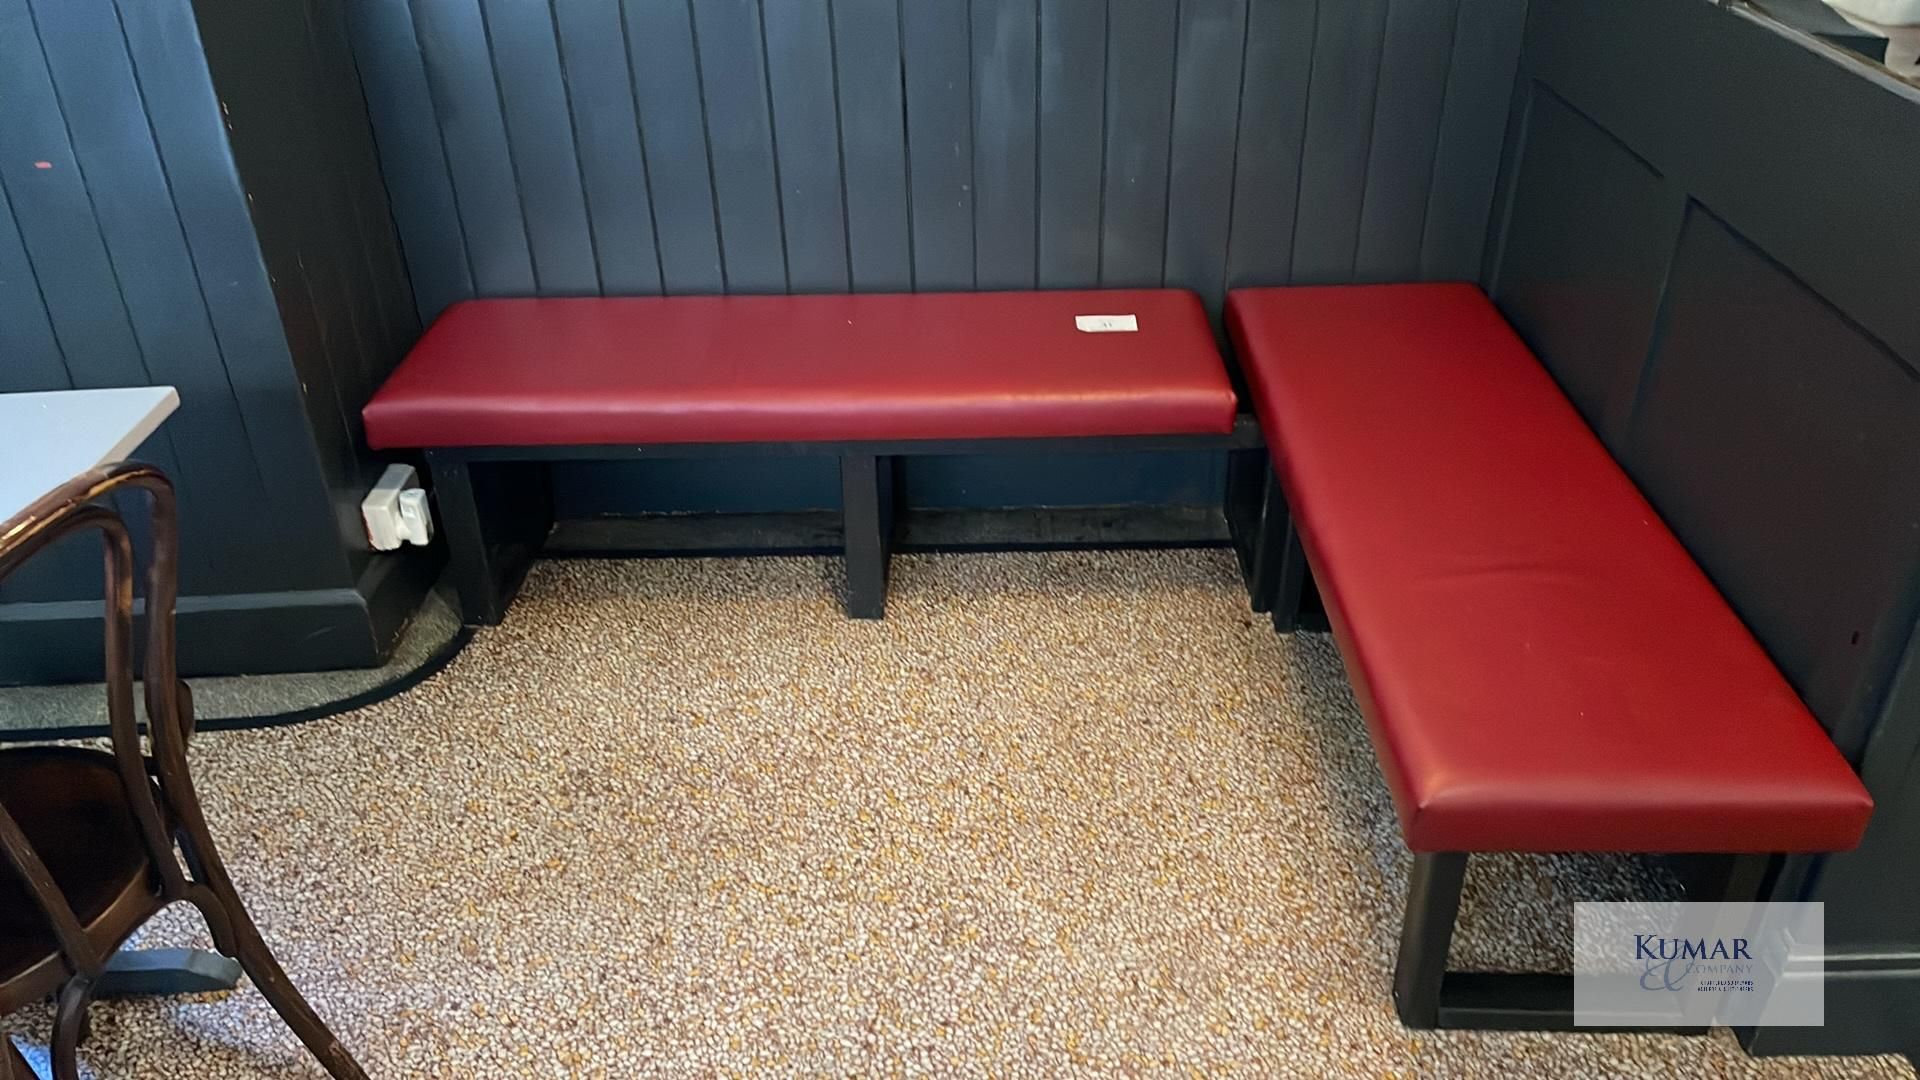 2: Red Upholstered Benches, Tops are removable and Frame is affixed to Wall - Will Require - Image 2 of 5